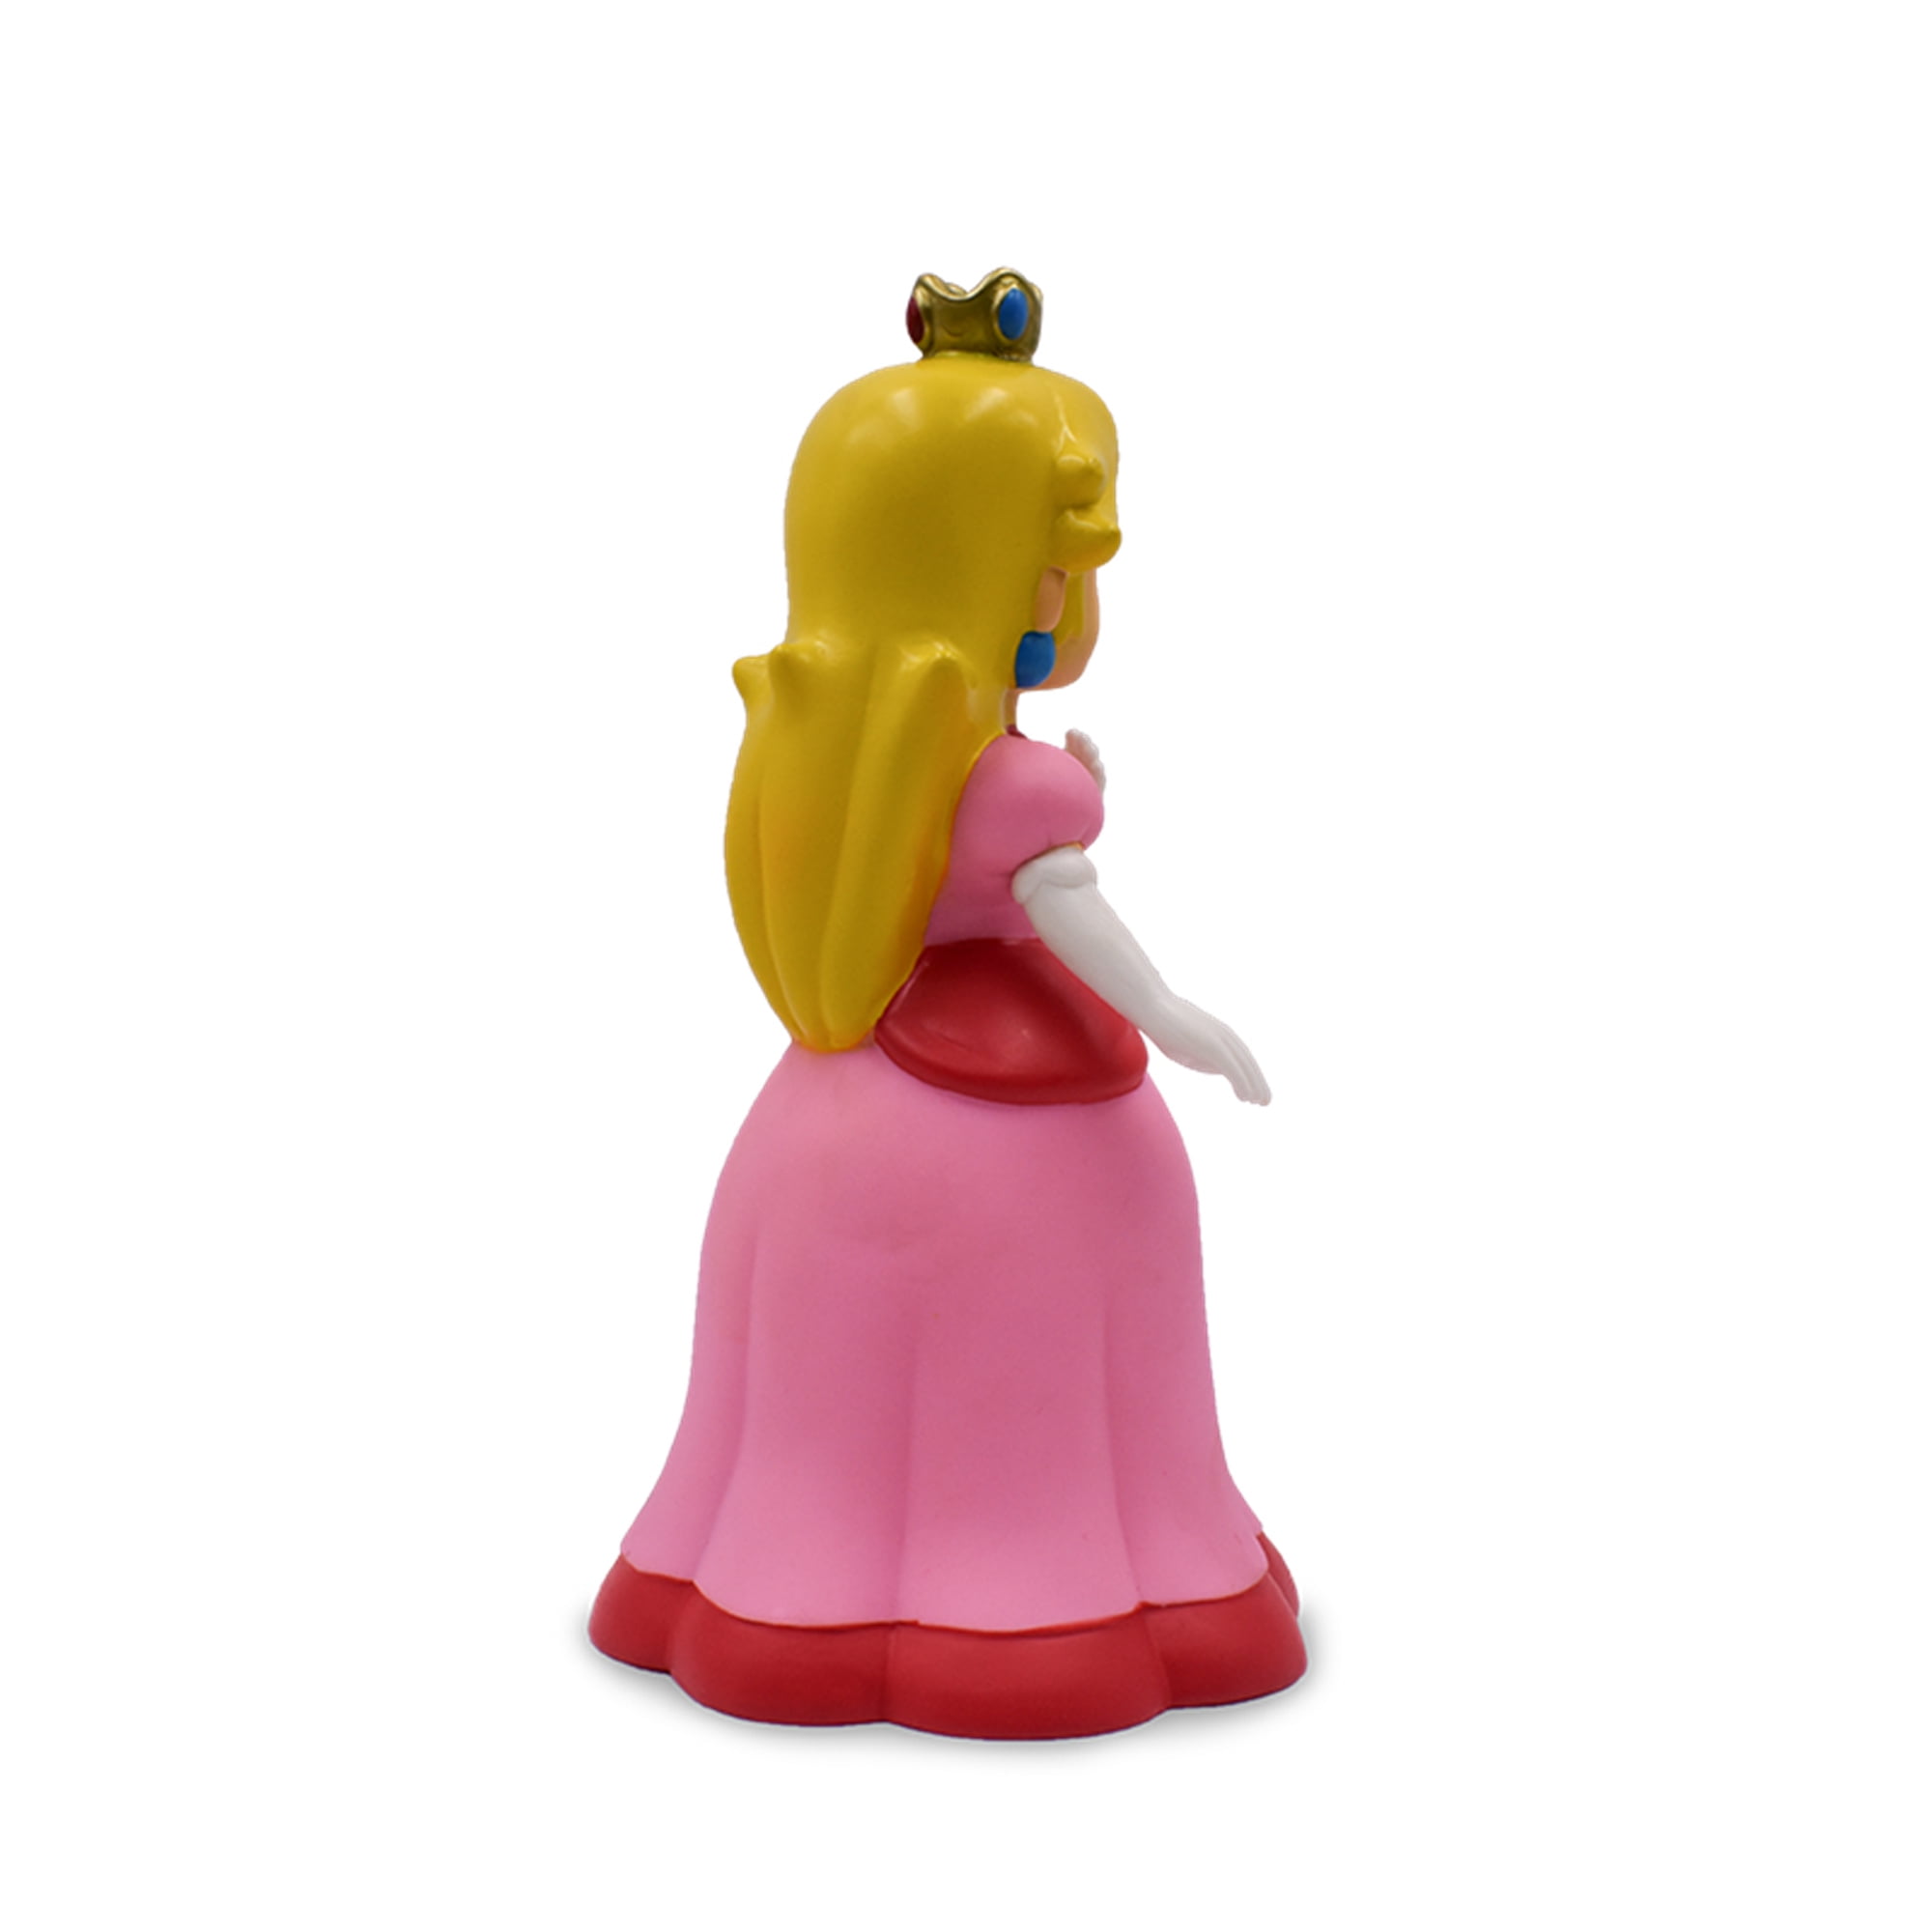 Details about   Gifts Princess Peach Vinyl Figure Plastic Toy Doll Collect 9" 